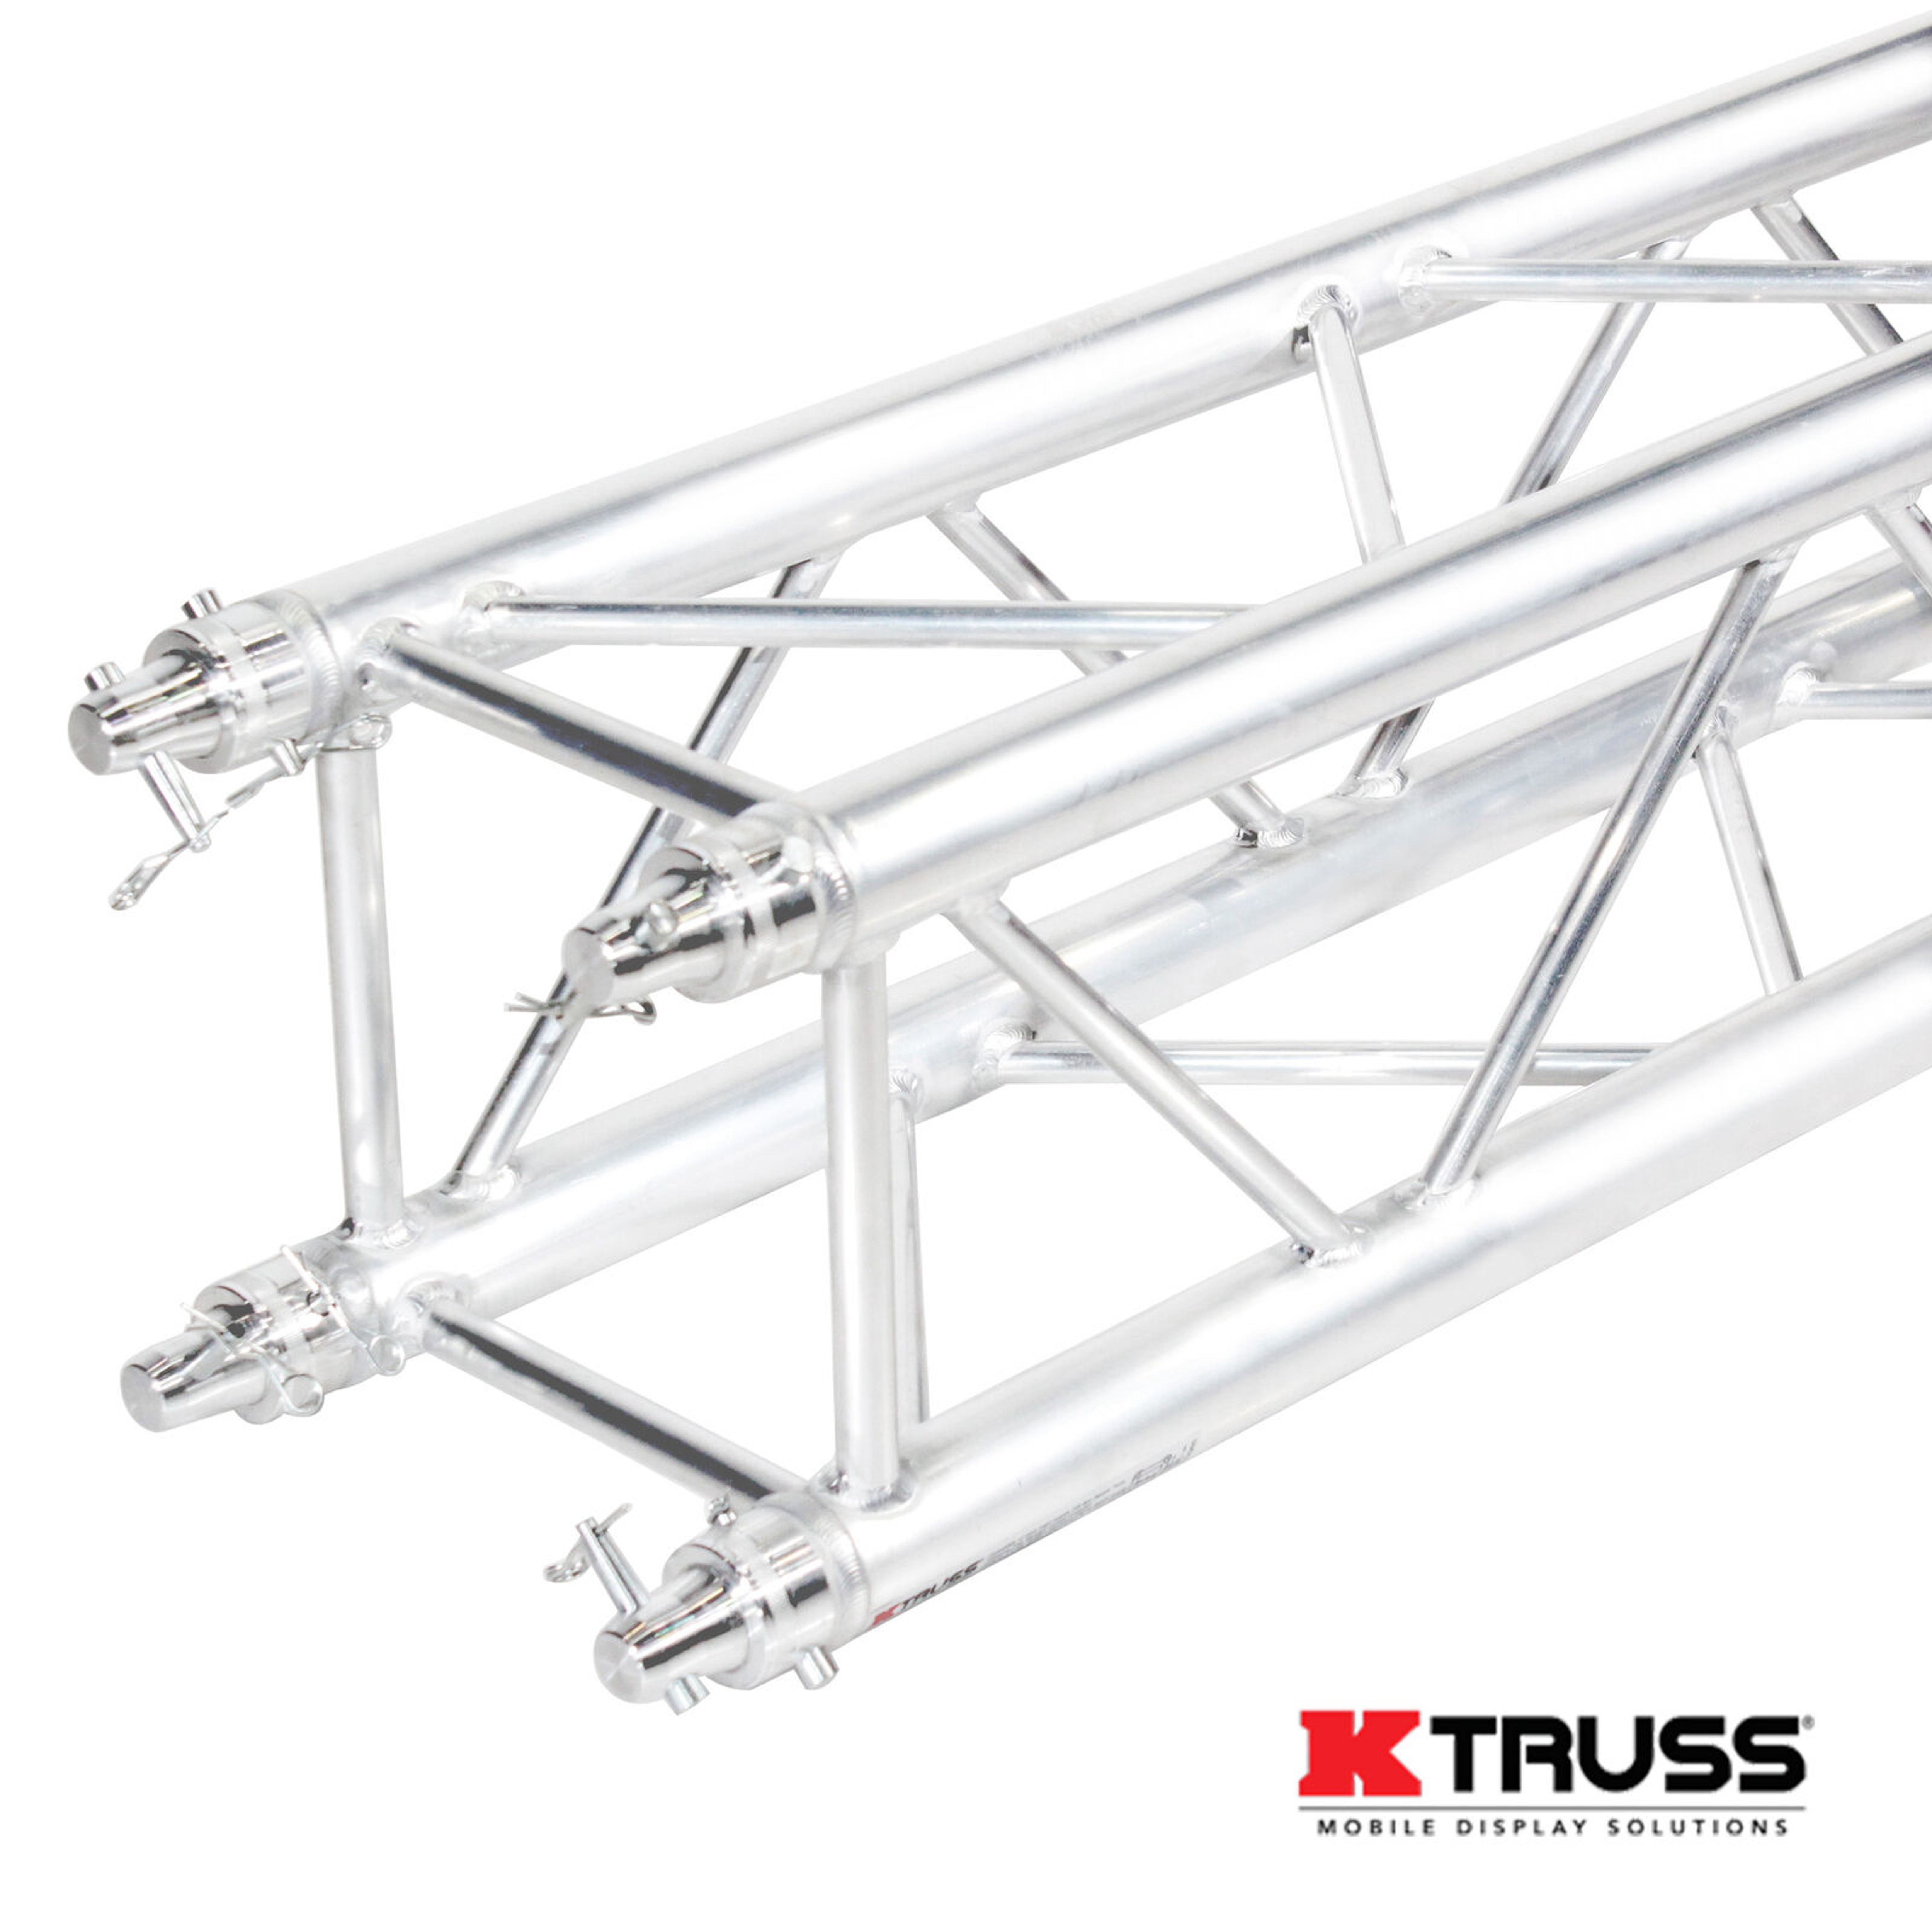 ProX XT-S4X492TOTEM - 4.92FT F31 Truss Totem Package with 12 Top Plate,  24 Base Plate, 4 Truss Sections and White Scrim Cover